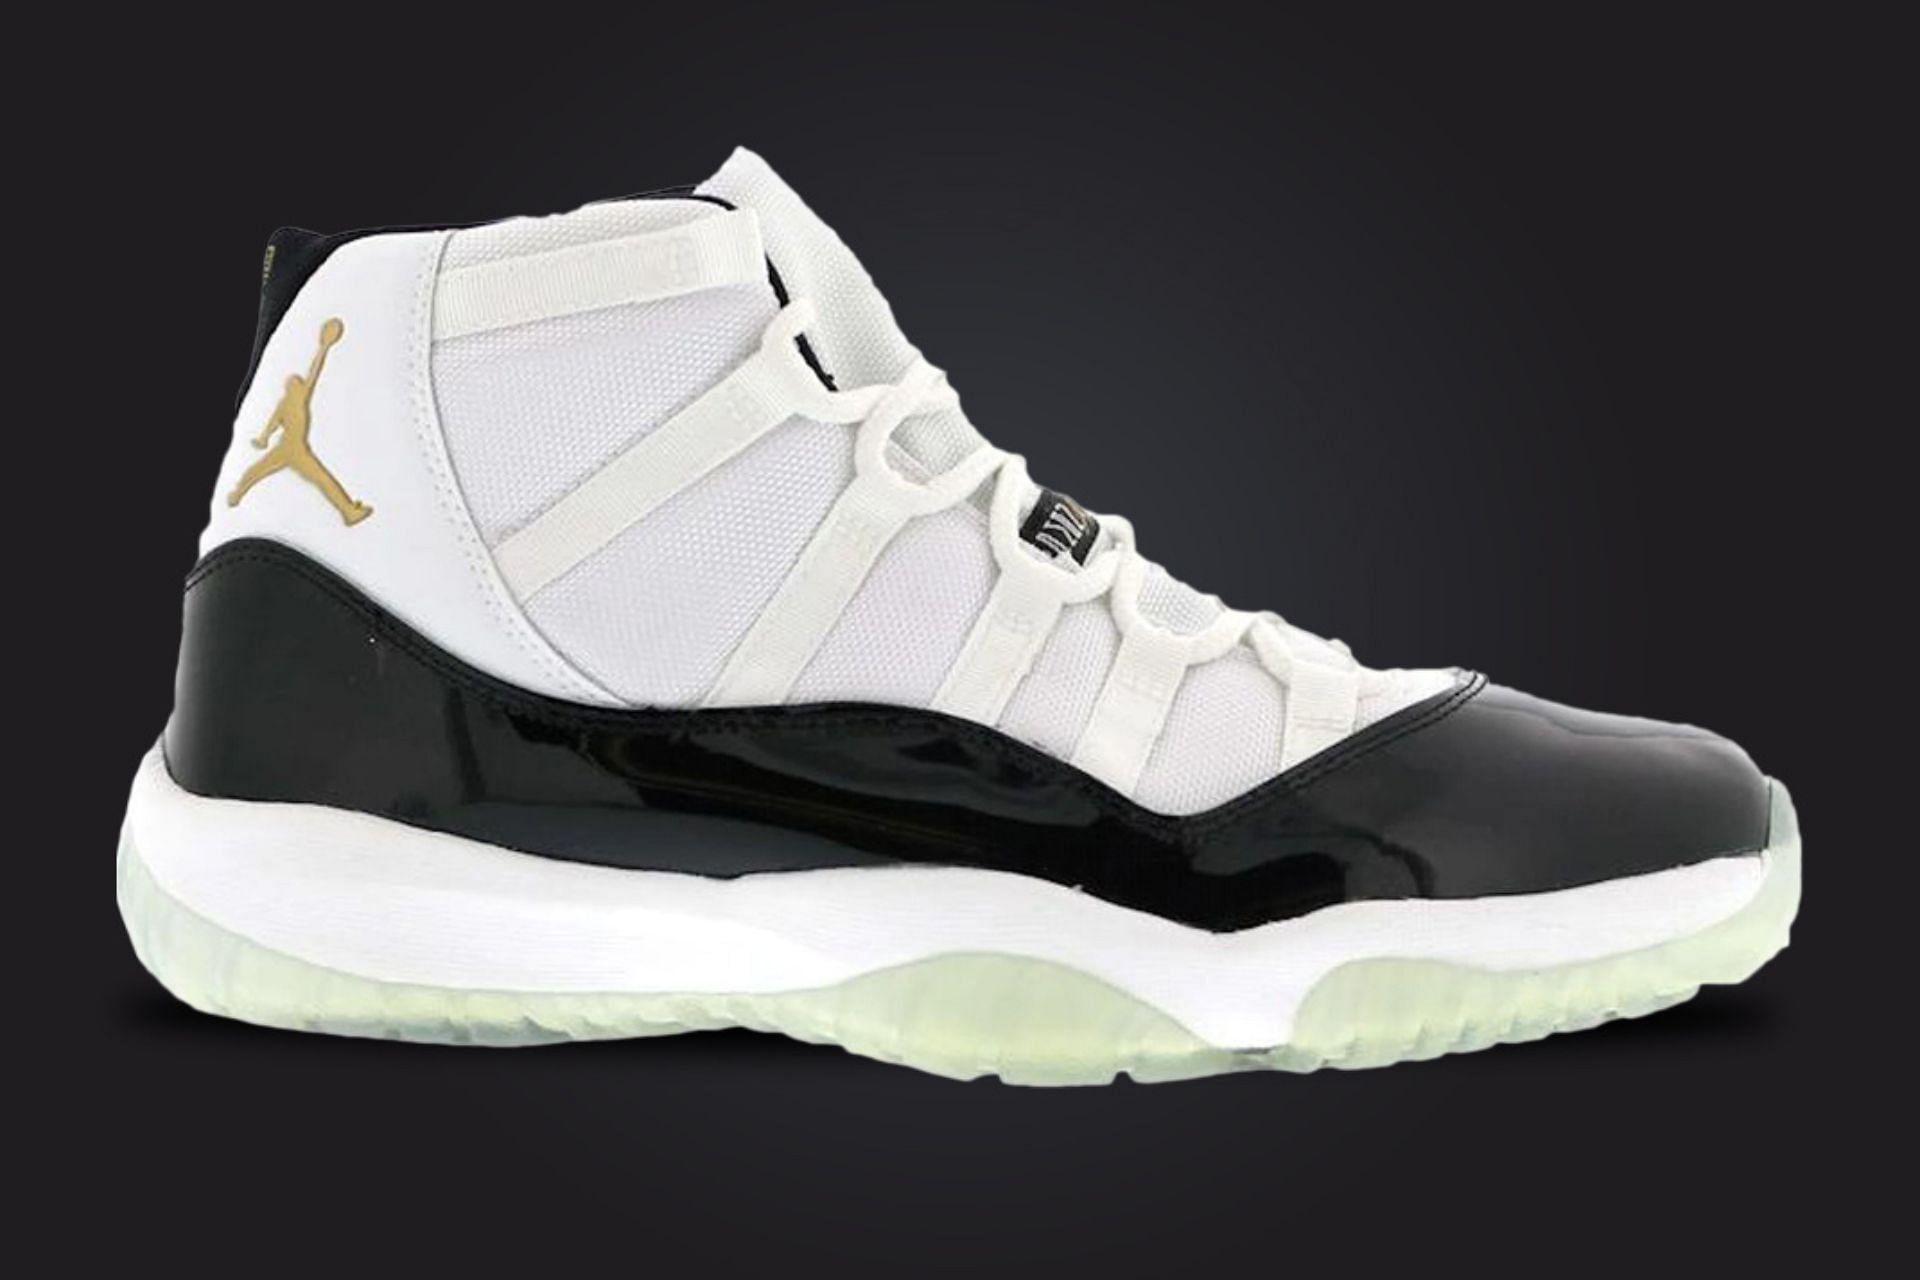 The upcoming Nike Air Jordan 11 &quot;DMP&quot; sneakers are a nod to the 2006-released Defining Moments Pack (Image via StockX)